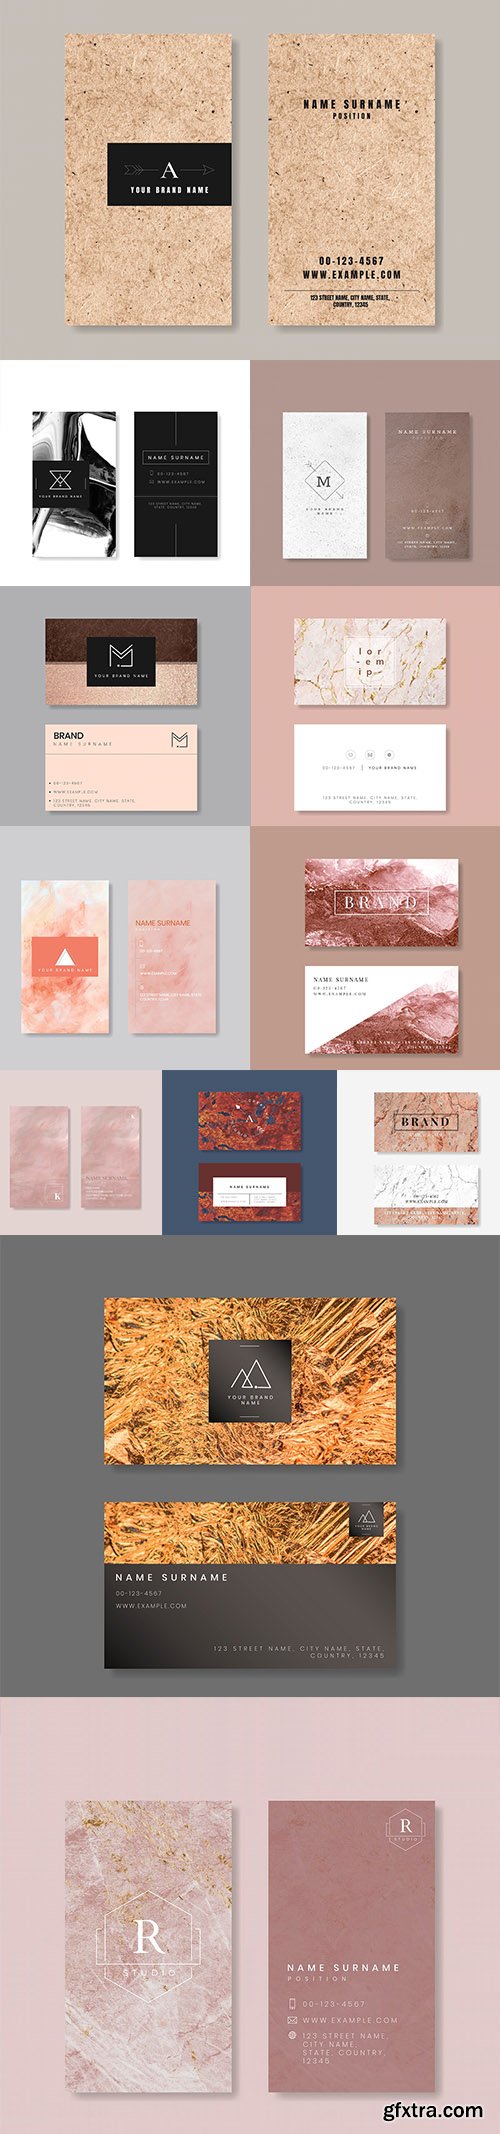 Set of Professional Business Card Templates vol1